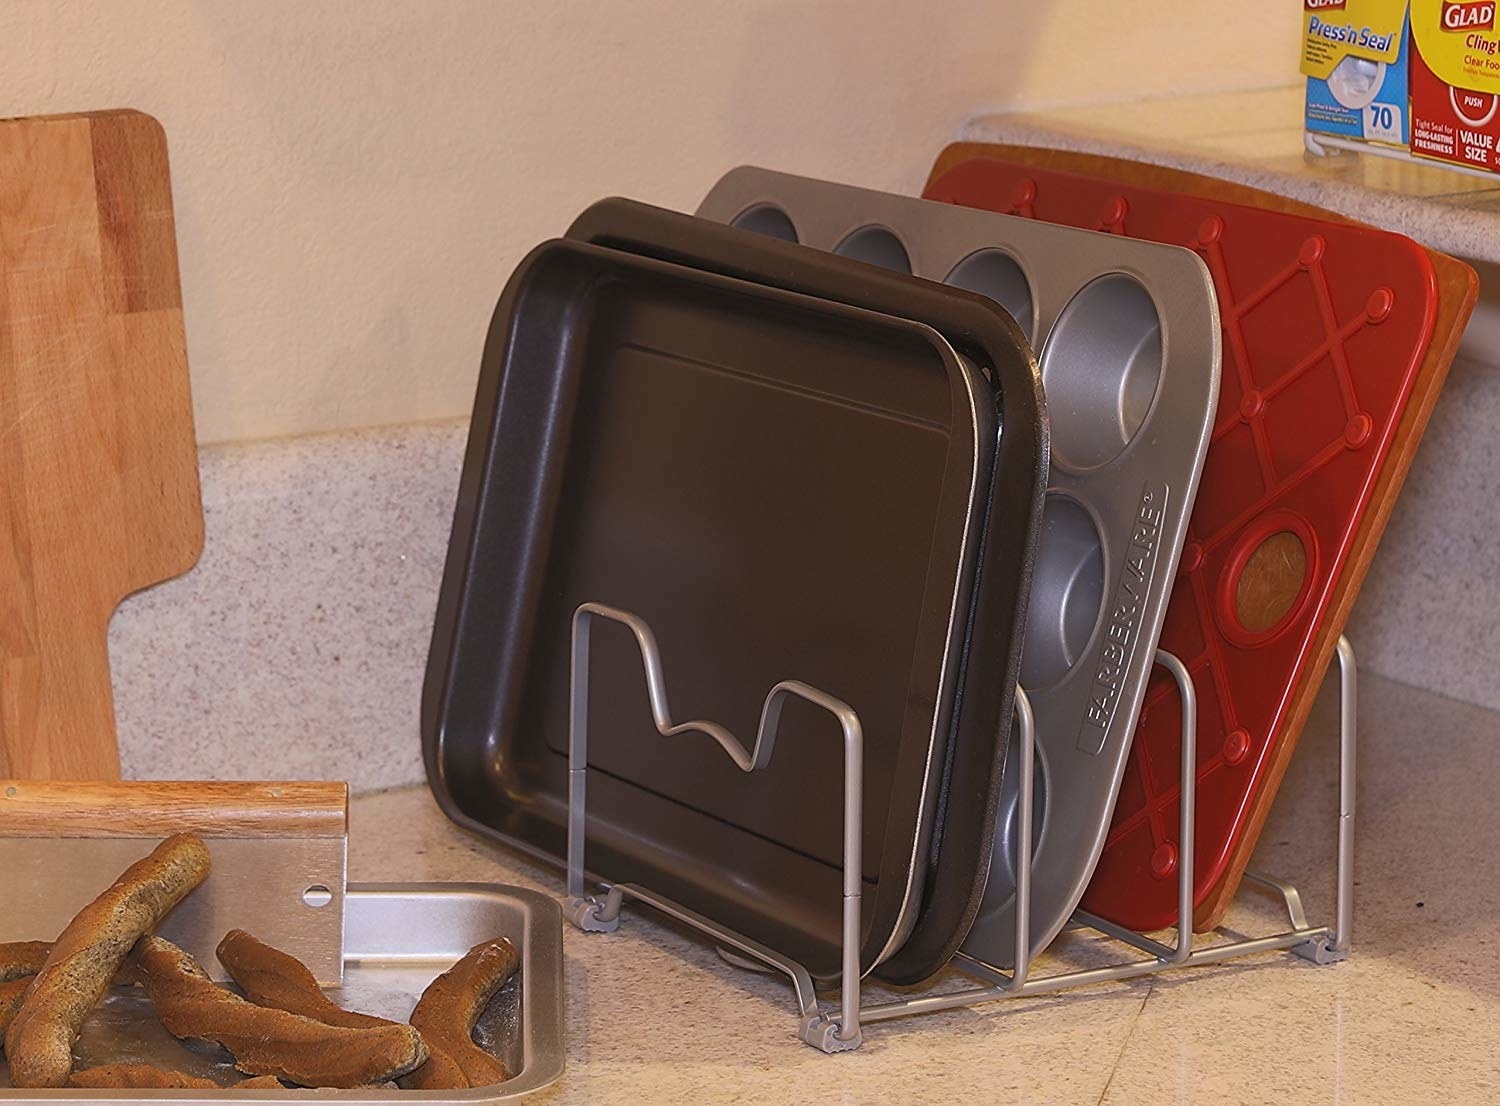 the pantry rack holding various baking trays